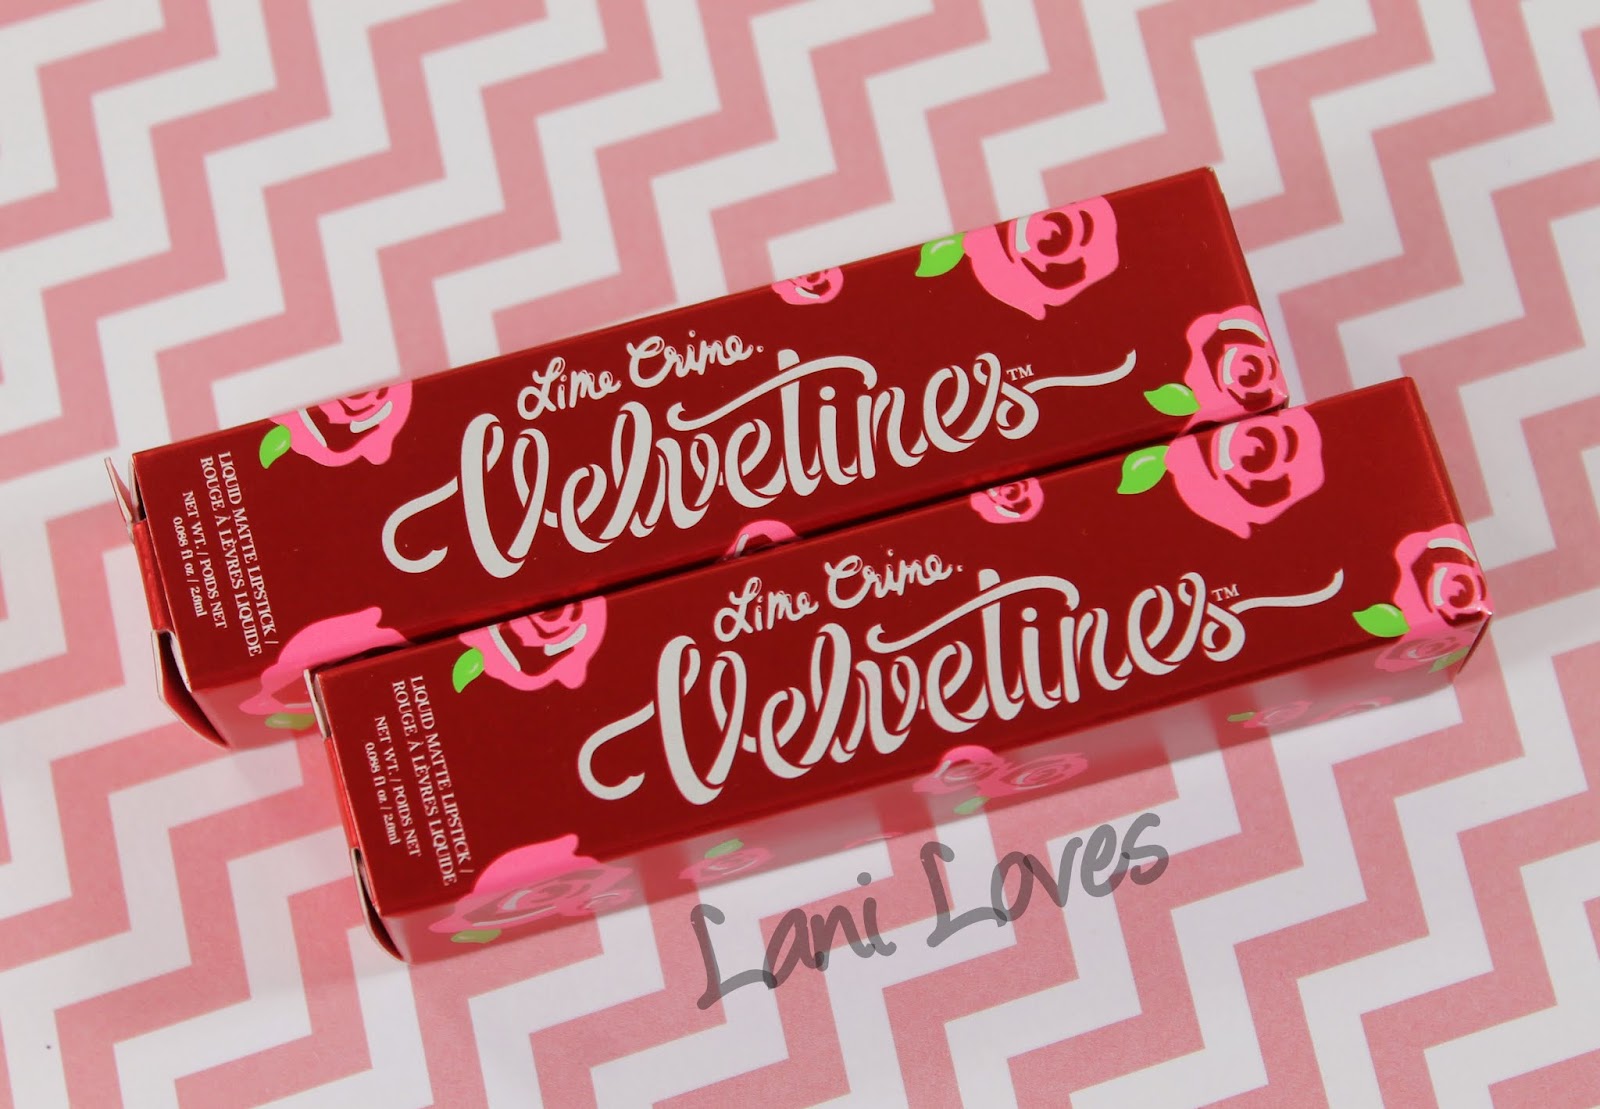 Lime Crime Velvetines - Riot and Rave Swatches & Review